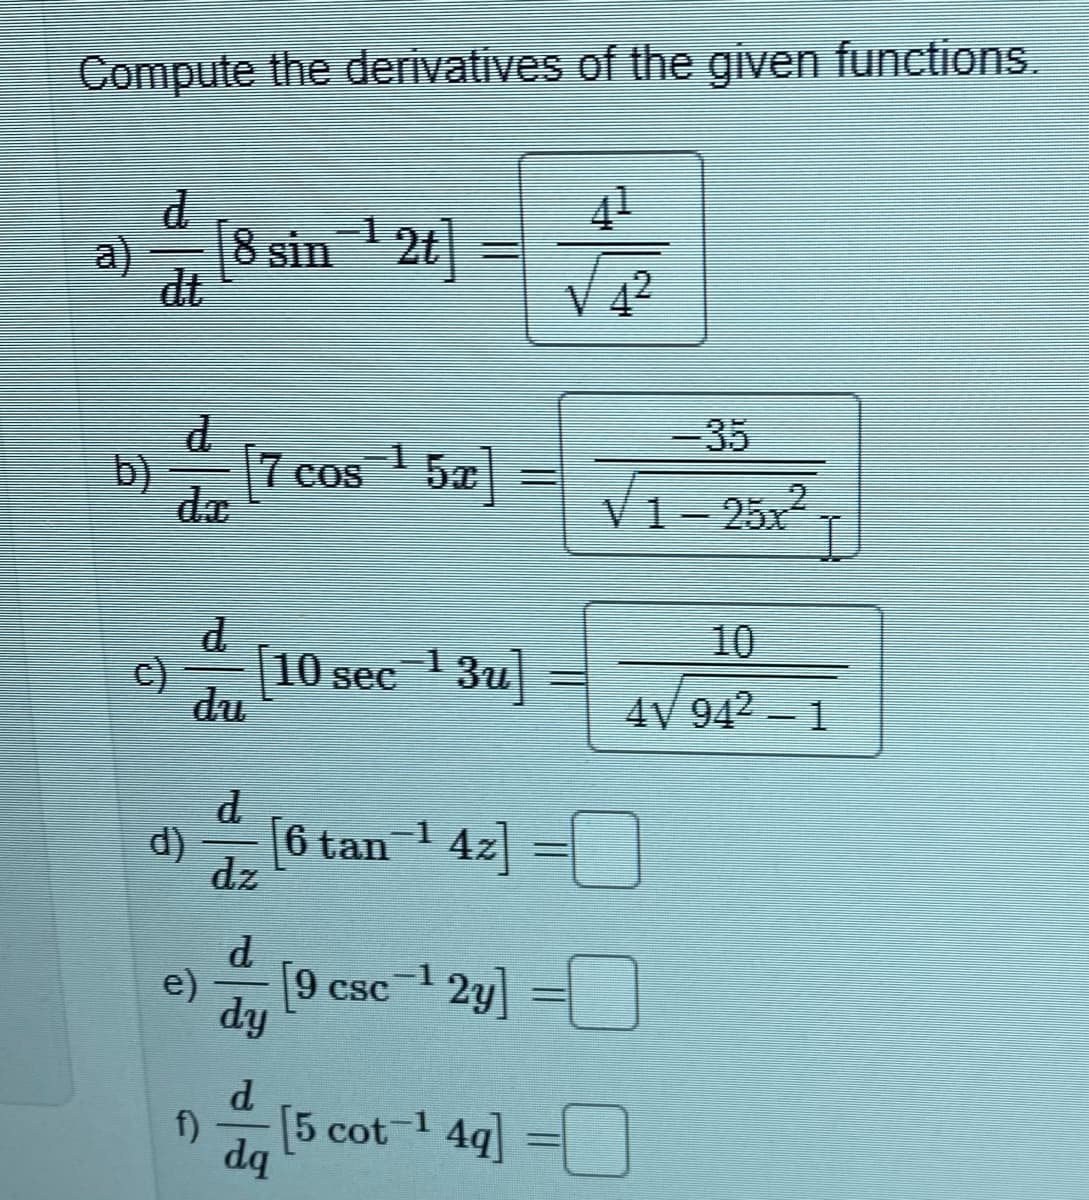 Compute the derivatives of the given functions.
41
a)
dt
[8 sin 1 2t]
V 4²
-35
b)
17 cos
d.
V1- 25x2
10
c)
10 sec ' 3u|
du
4V 942 – 1
d
d)
6 tan 1 4z] =
dz
d.
e)
[9 csc 1 2y] =
dy
CSC
d.
f)
[5 cot 1 4q] =
dq
